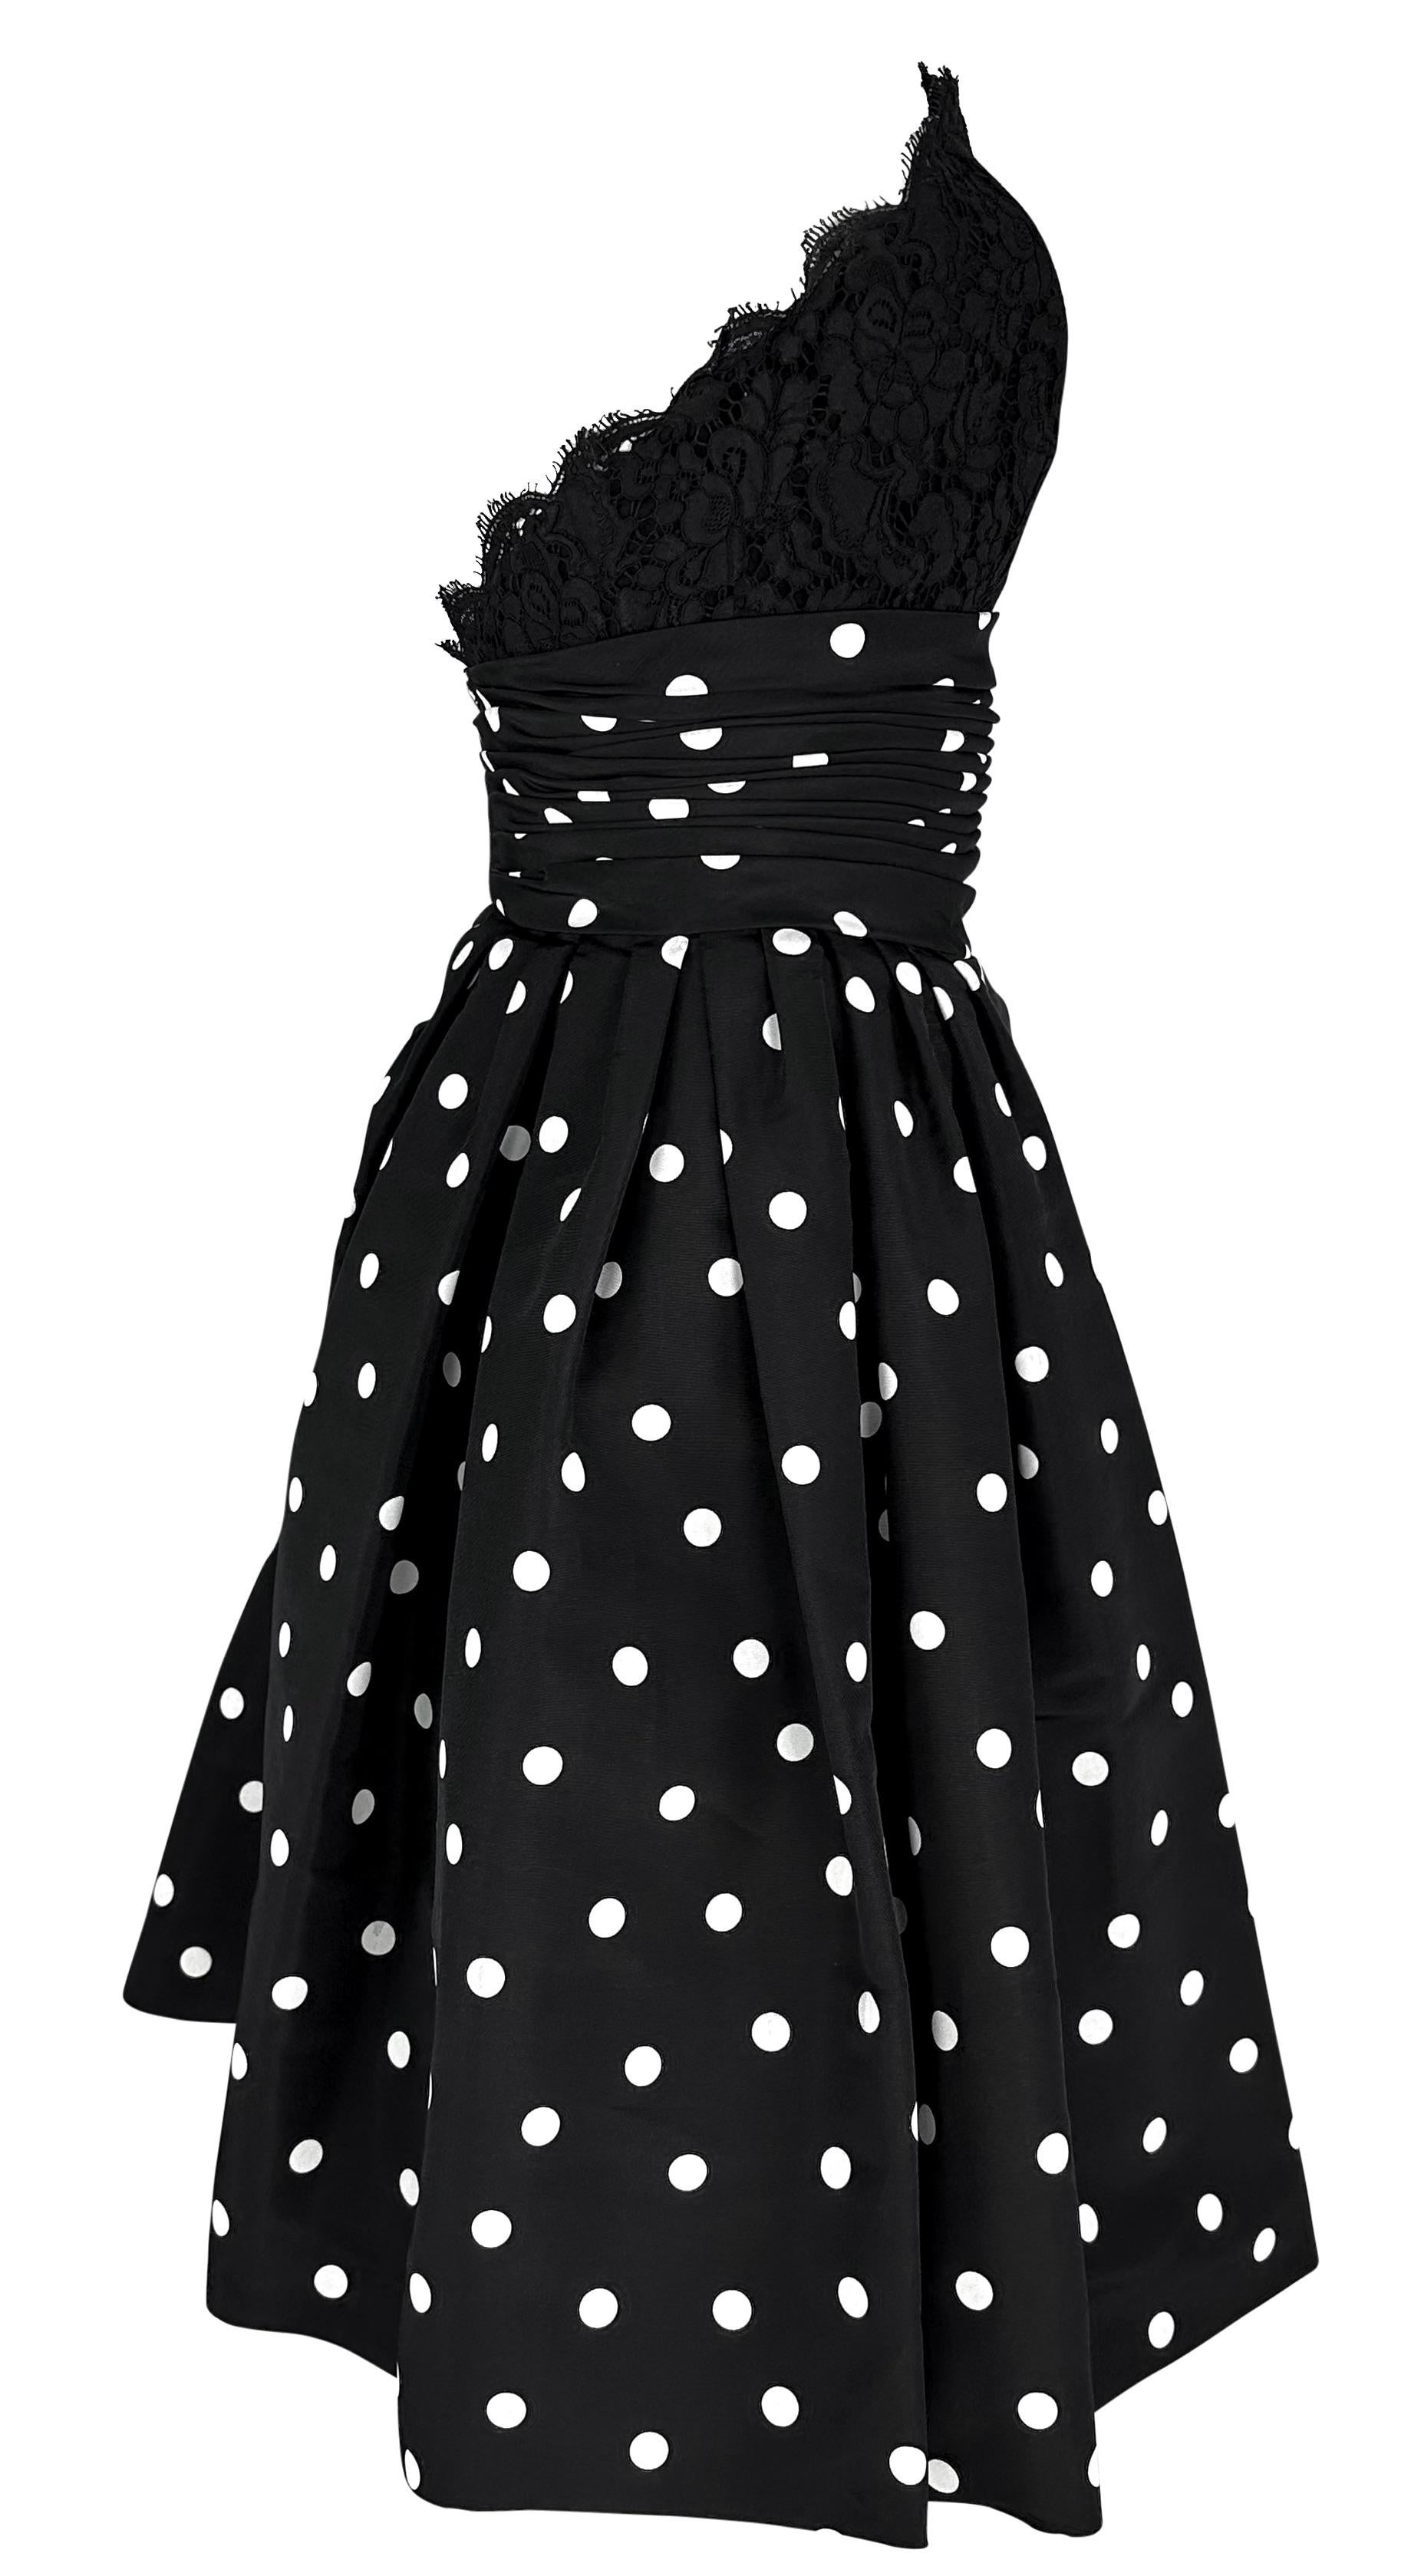  S/S 1988 Chanel by Karl Lagerfeld Runway Polka Dot Lace Strapless Flare Dress For Sale 3